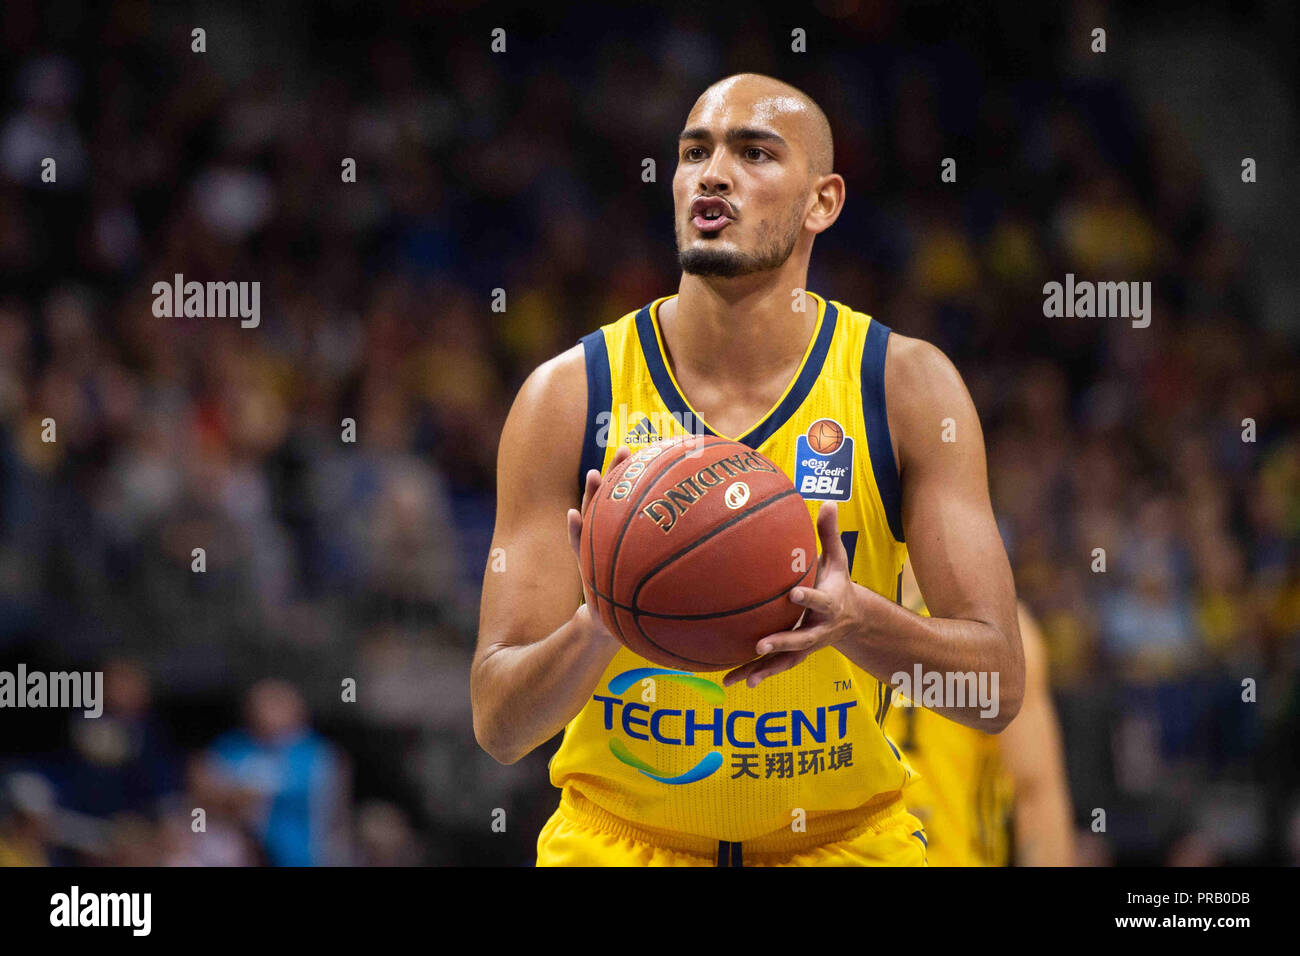 29 September 2018, Berlin: Basketball: Bundesliga, ALBA Berlin - Science City Jena, main round, 1st matchday of the season 2018/19 in the Mercedes-Benz Arena. Berlin's Stefan Peno at the free-throw. Photo: Arne Immanuel Bänsch/dpa Stock Photo